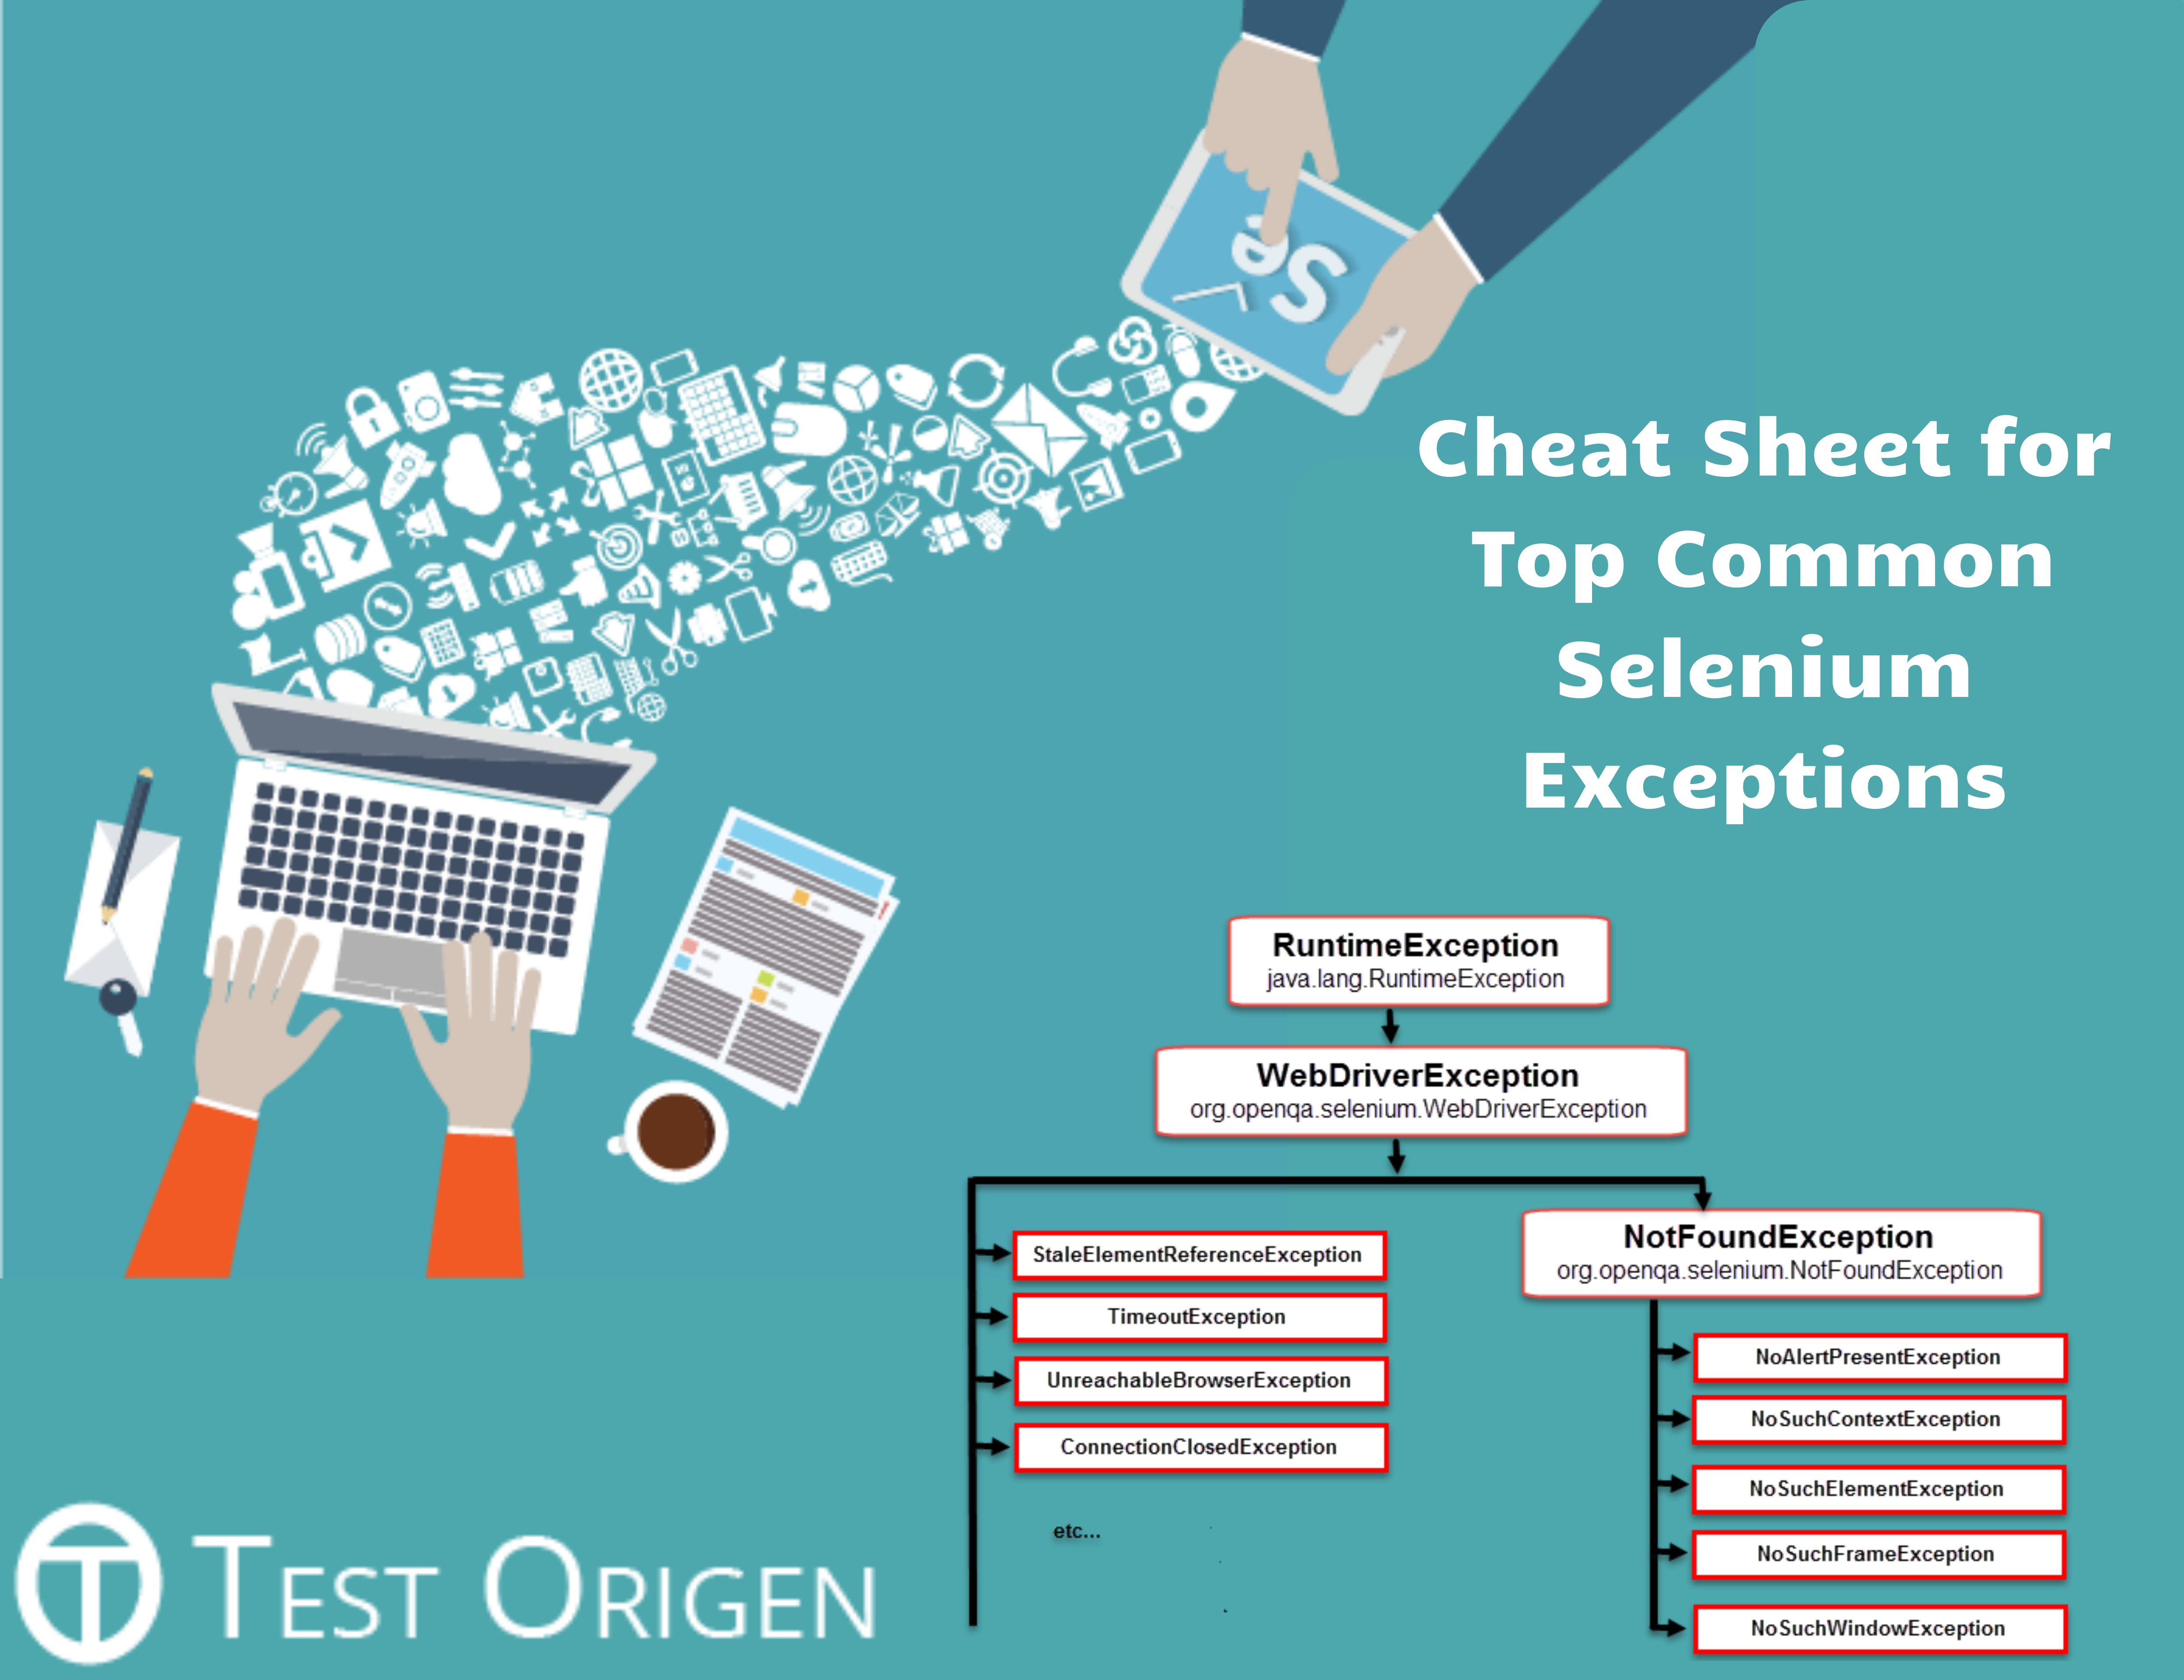 Cheat Sheet for Top Common Selenium Exceptions. selenium exceptions